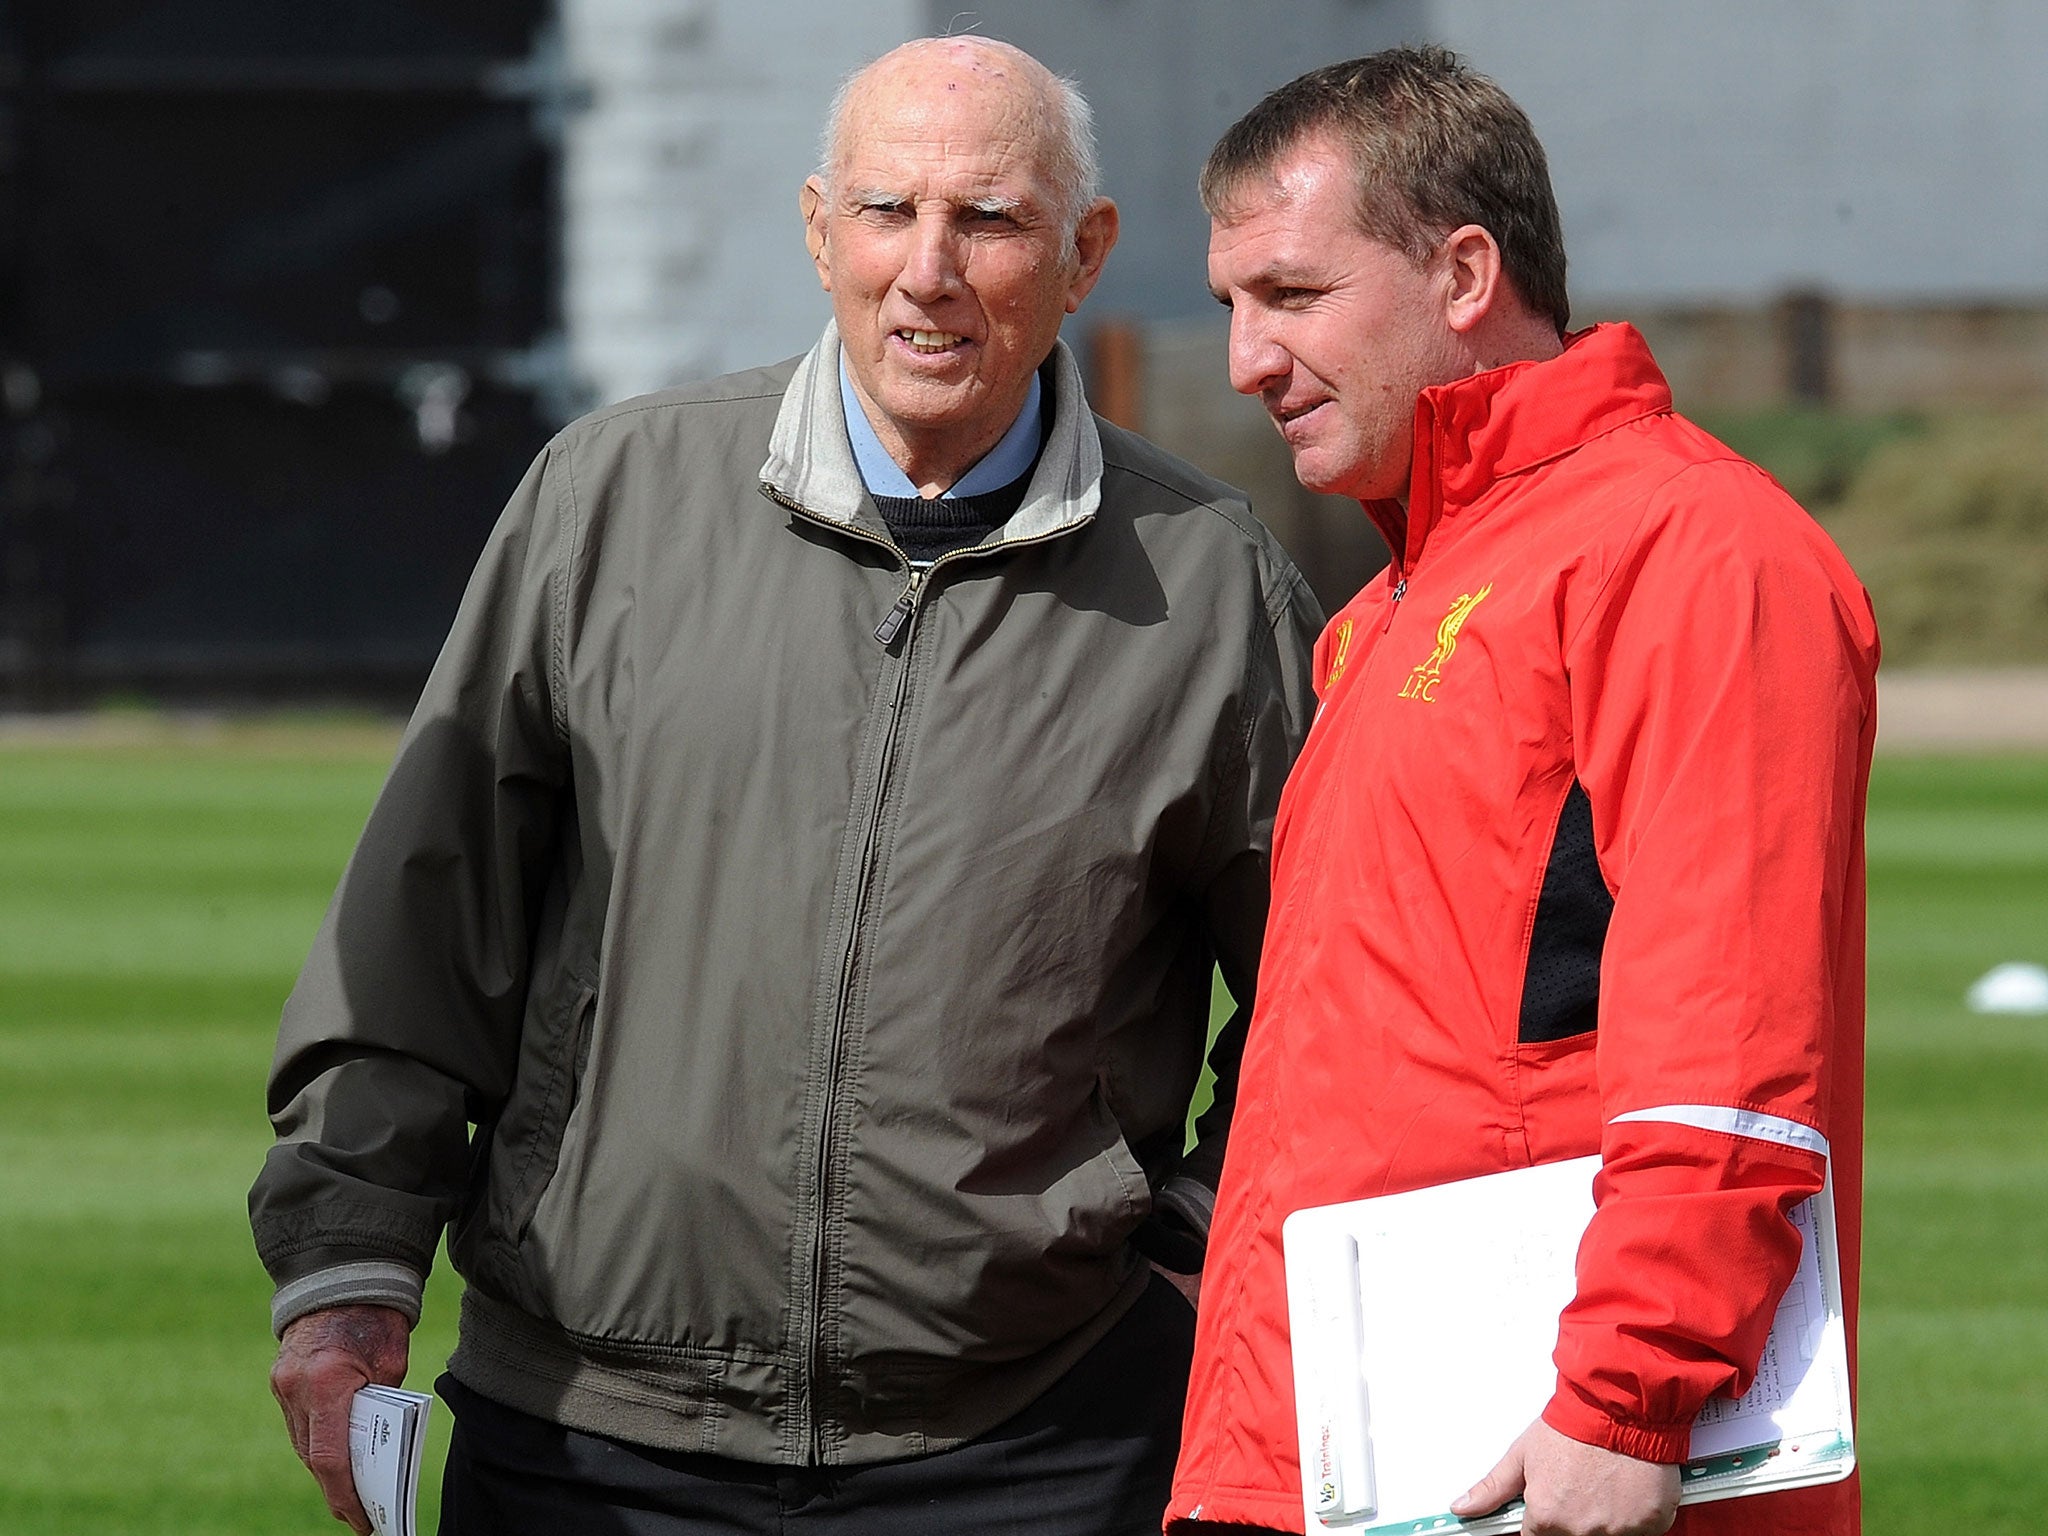 Moran attended a Liverpool training session in 2013 when Brendan Rodgers was still manager